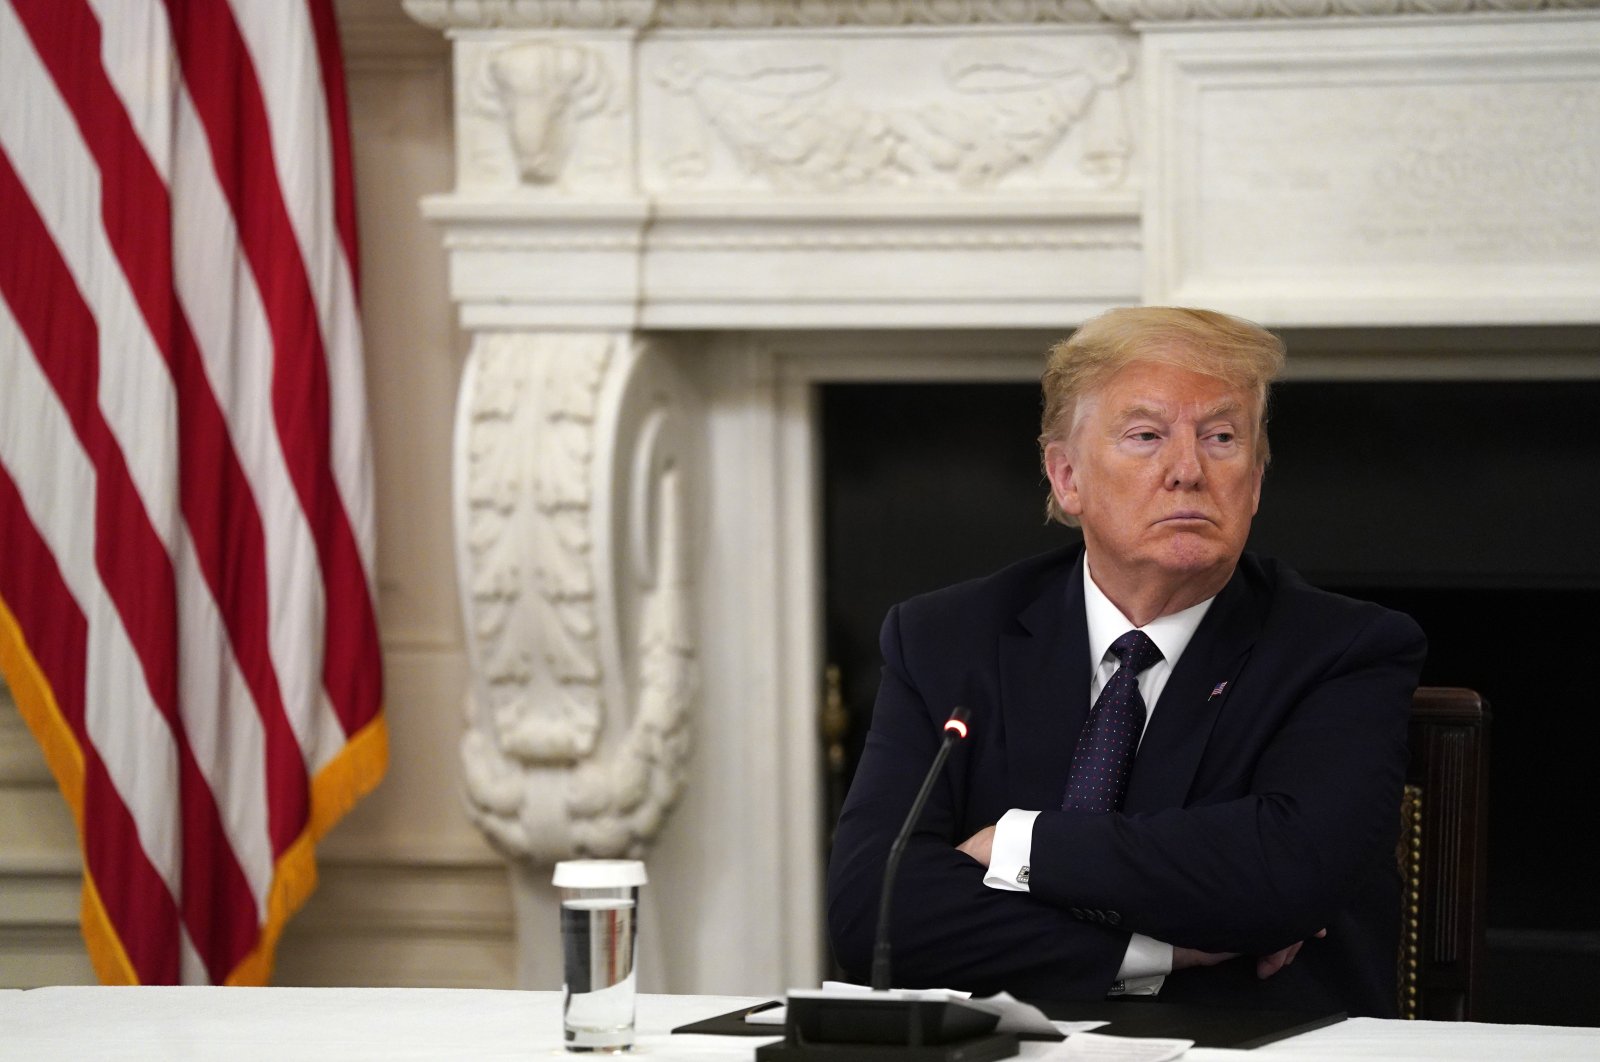 U.S. President Donald Trump listens during a meeting with restaurant industry executives about the coronavirus response, in the State Dining Room of the White House, Monday, May 18, 2020, in Washington. (AP Photo)